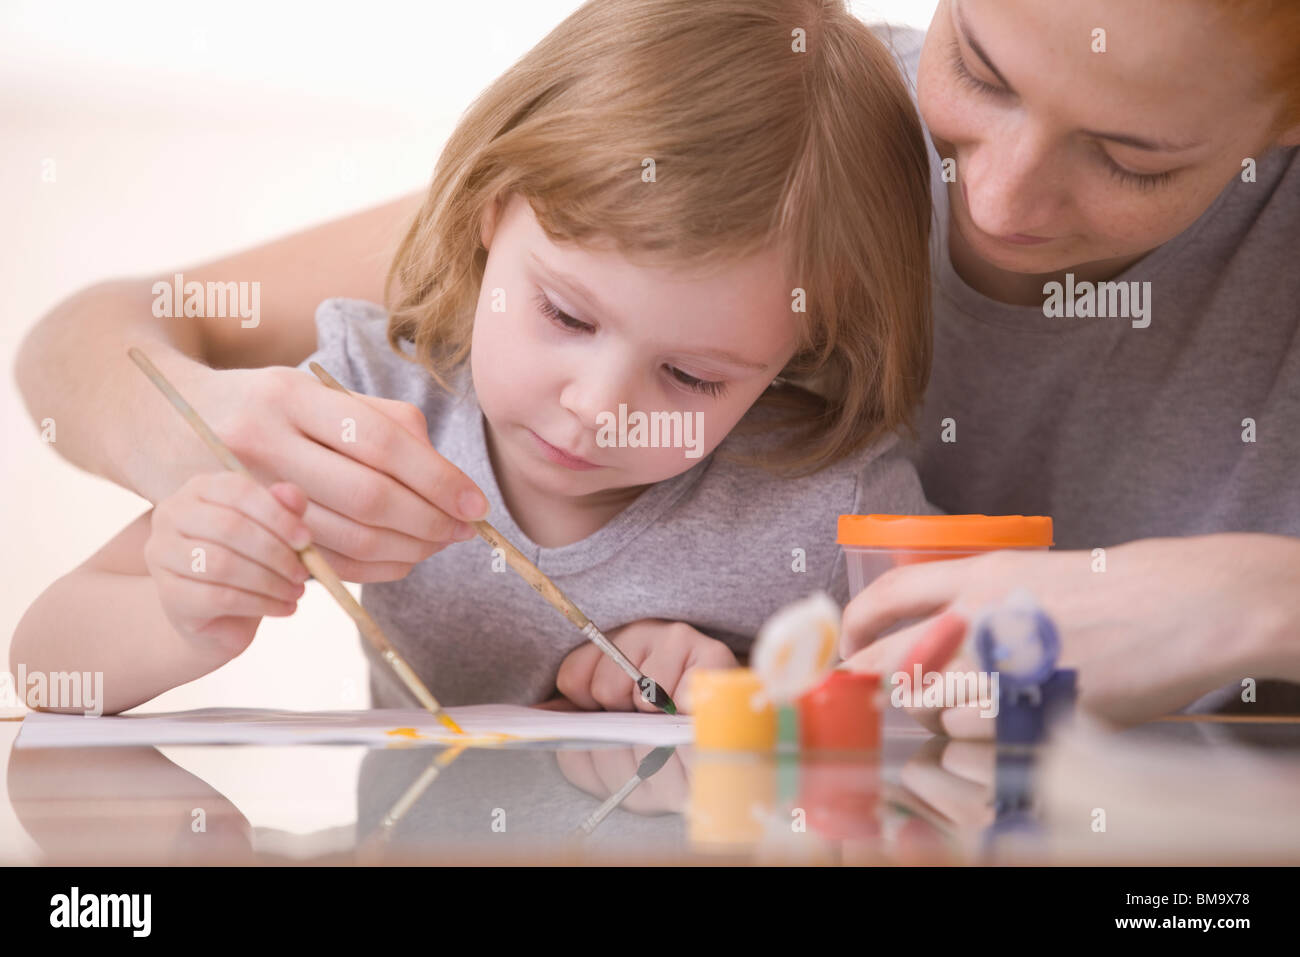 mother and saughter painting together Stock Photo